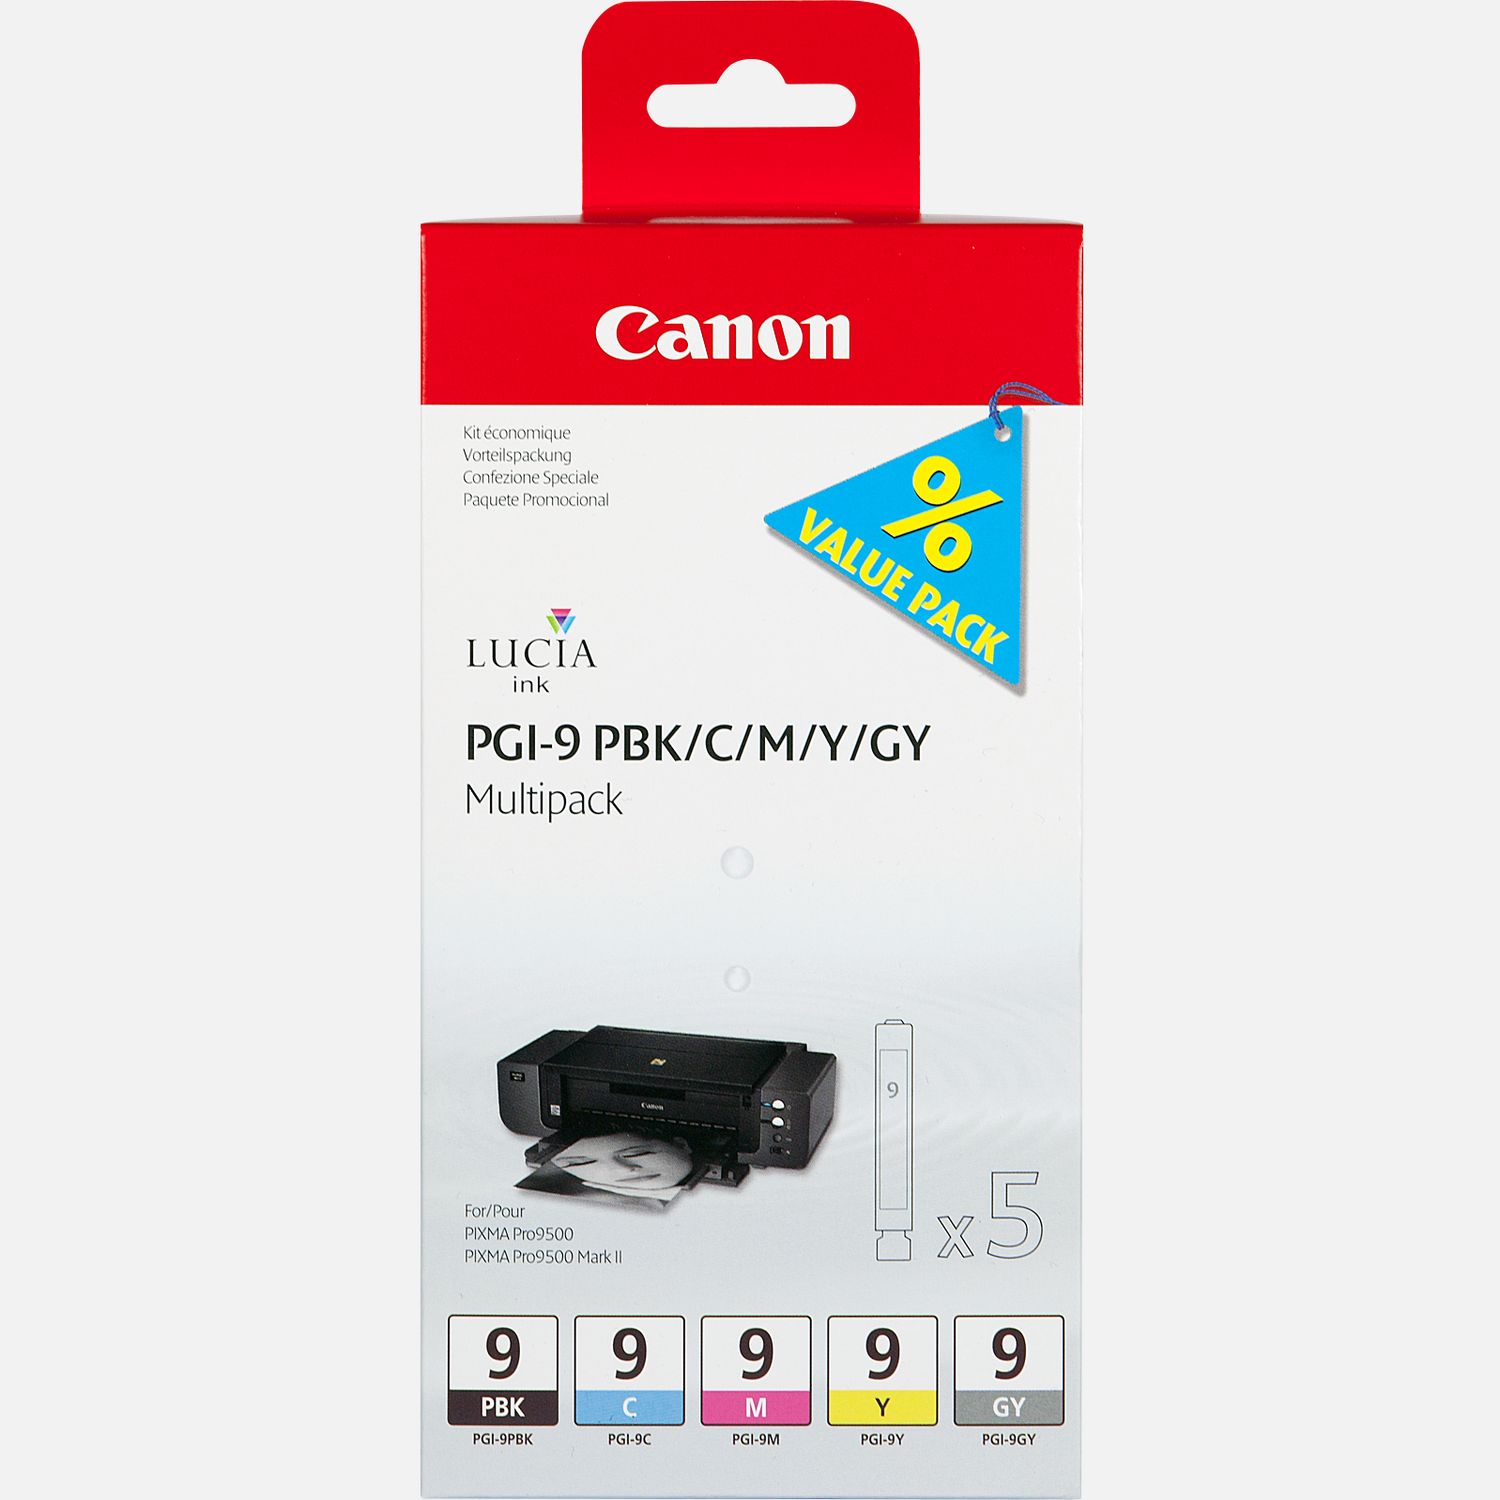 Image of 5 Cartucce Inkjet Multipack Canon PGI-9 PBK/C/M/Y/GY